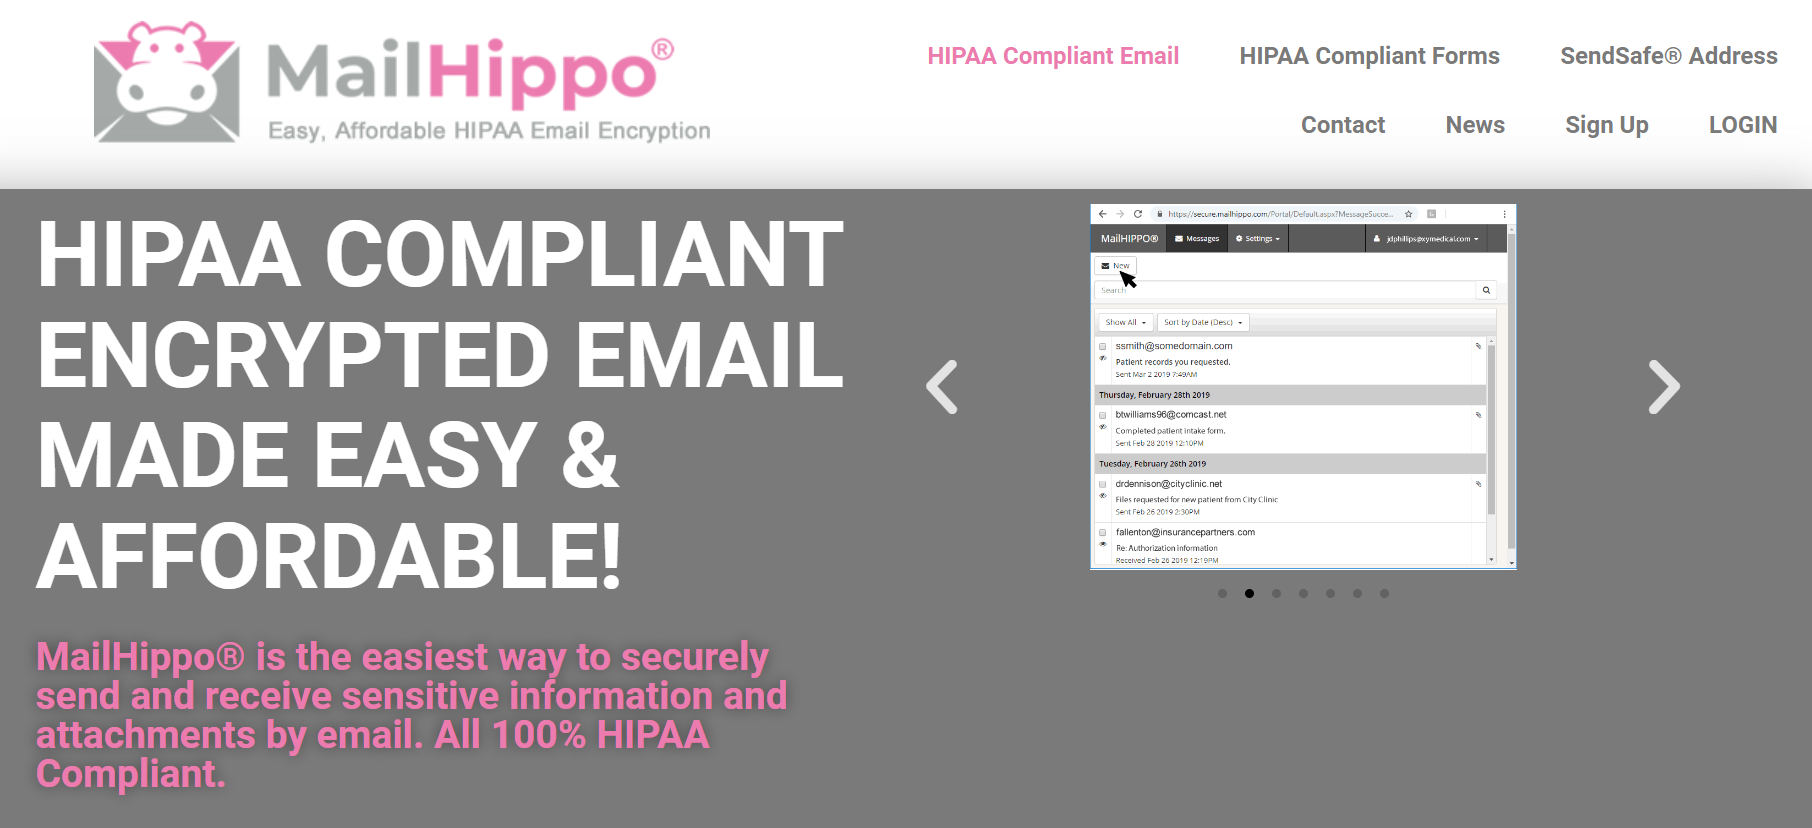 5 Best HIPAA-Compliant Email Services